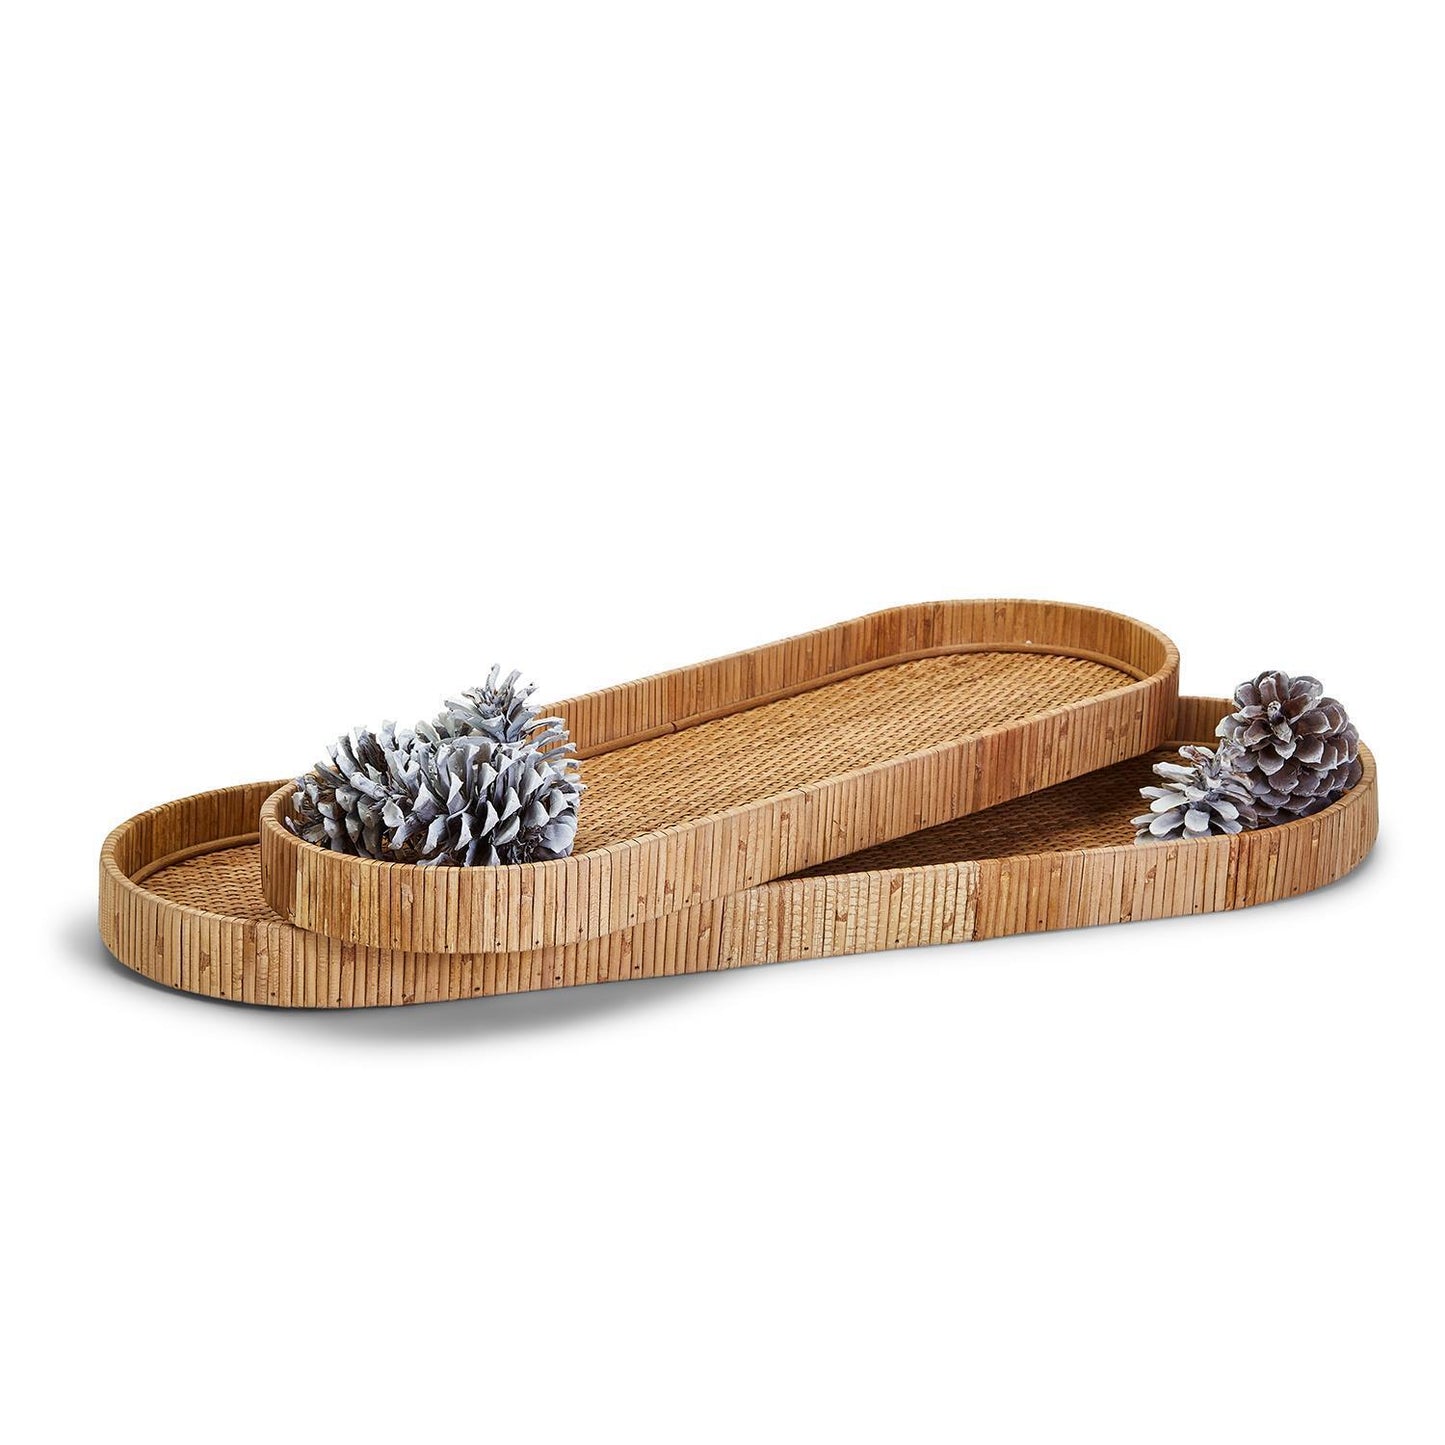 Oval Rattan Tray 2 Sizes